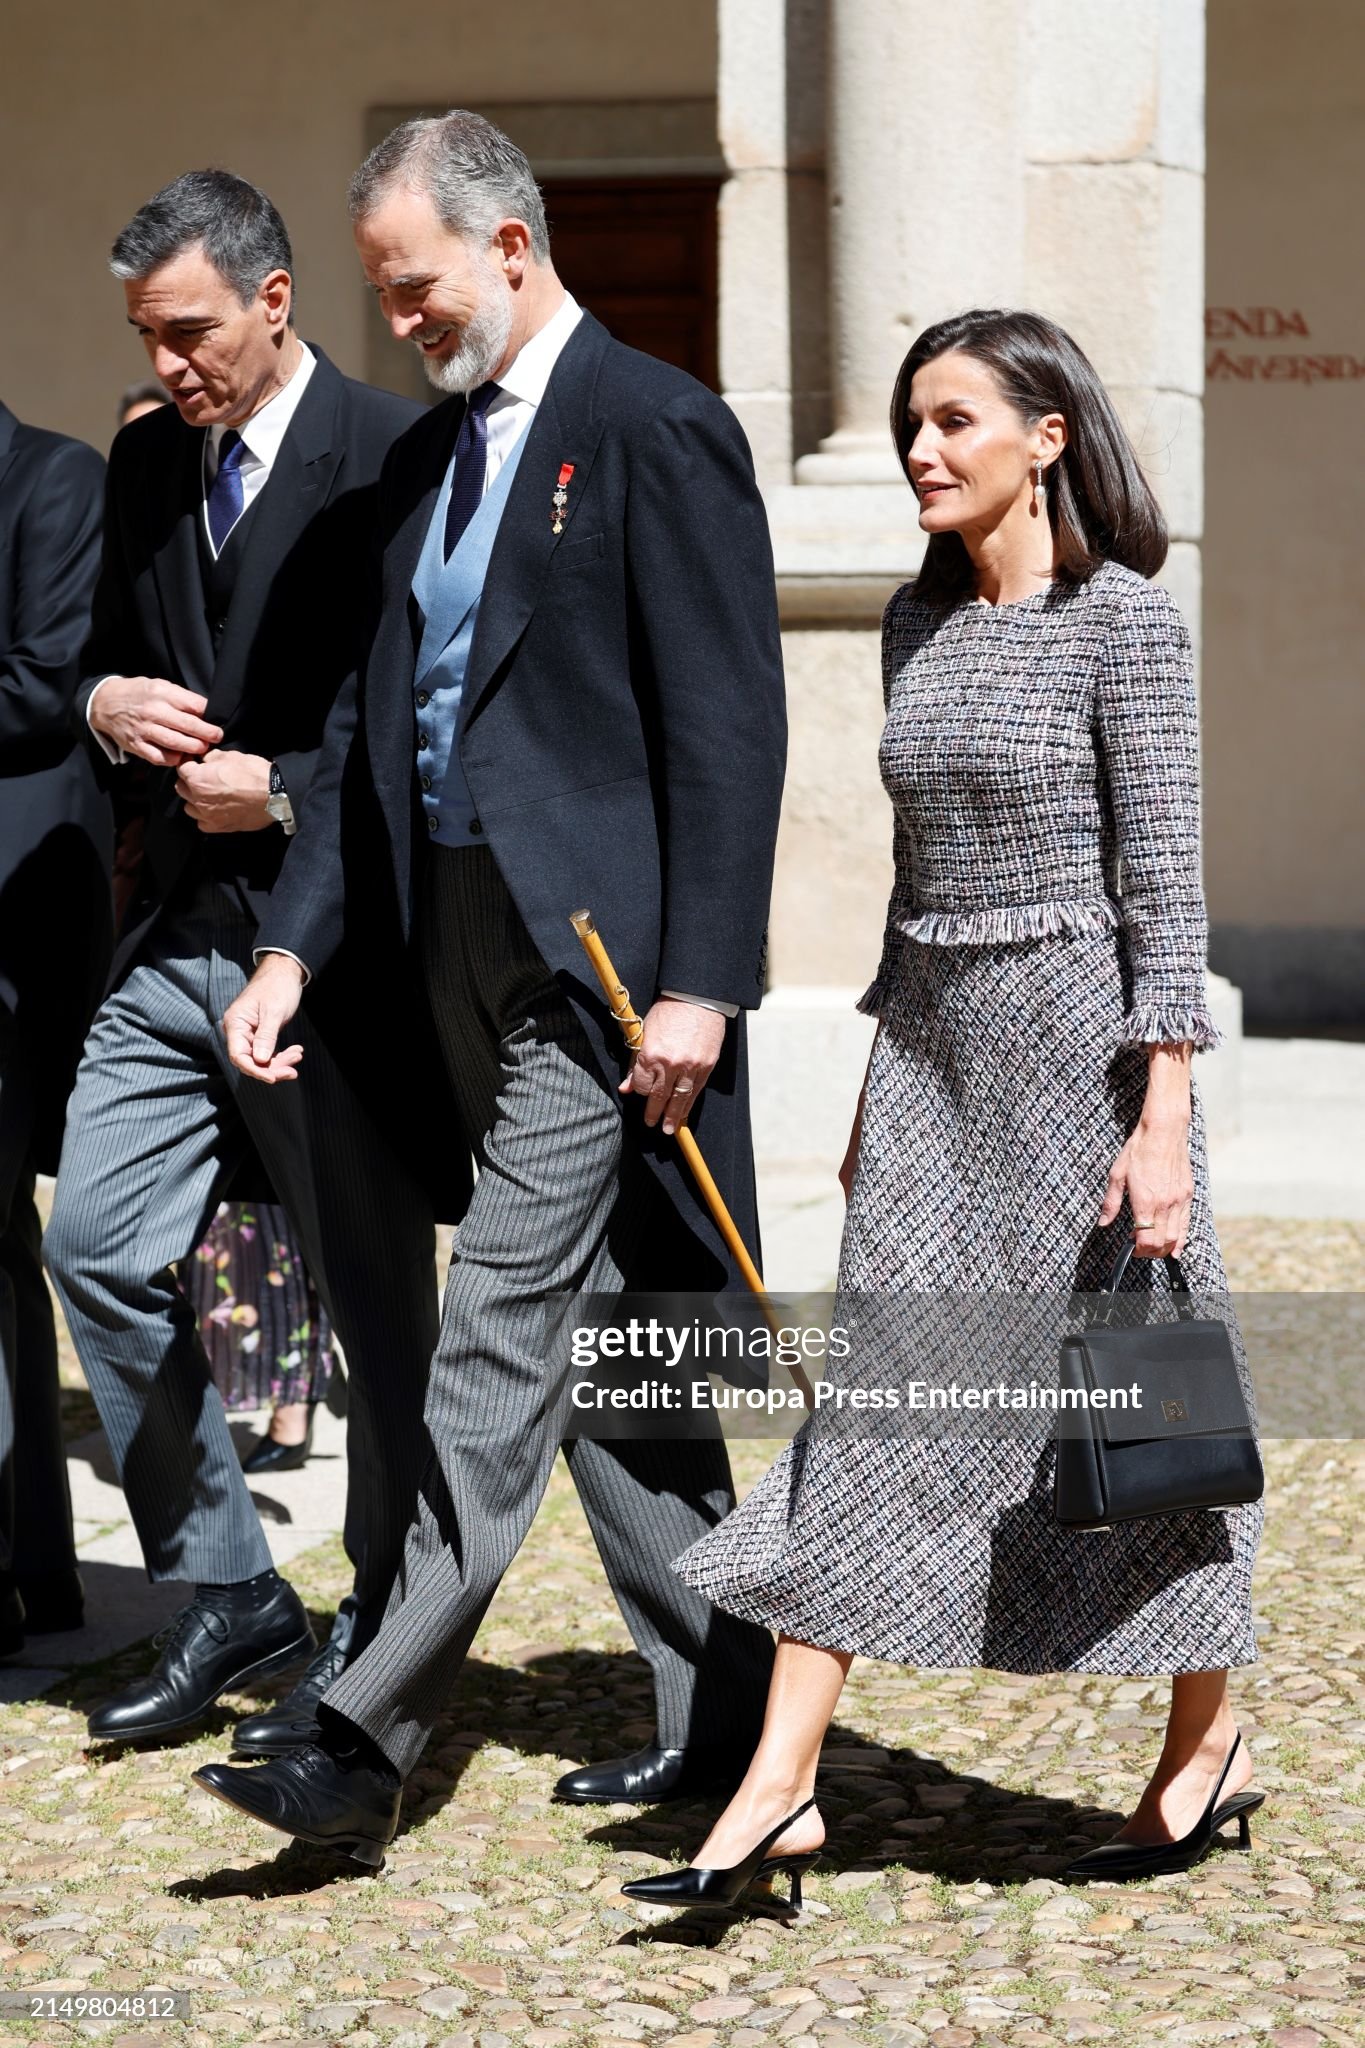 the-king-and-queen-of-spain-present-the-miguel-de-cervantes-prize-for-literature-in-the.jpg?s=2048x2048&w=gi&k=20&c=FM9SbM_Vkt4Qkulg-AGD9nEkKxlEGhzJxMhMIuQfNHE=